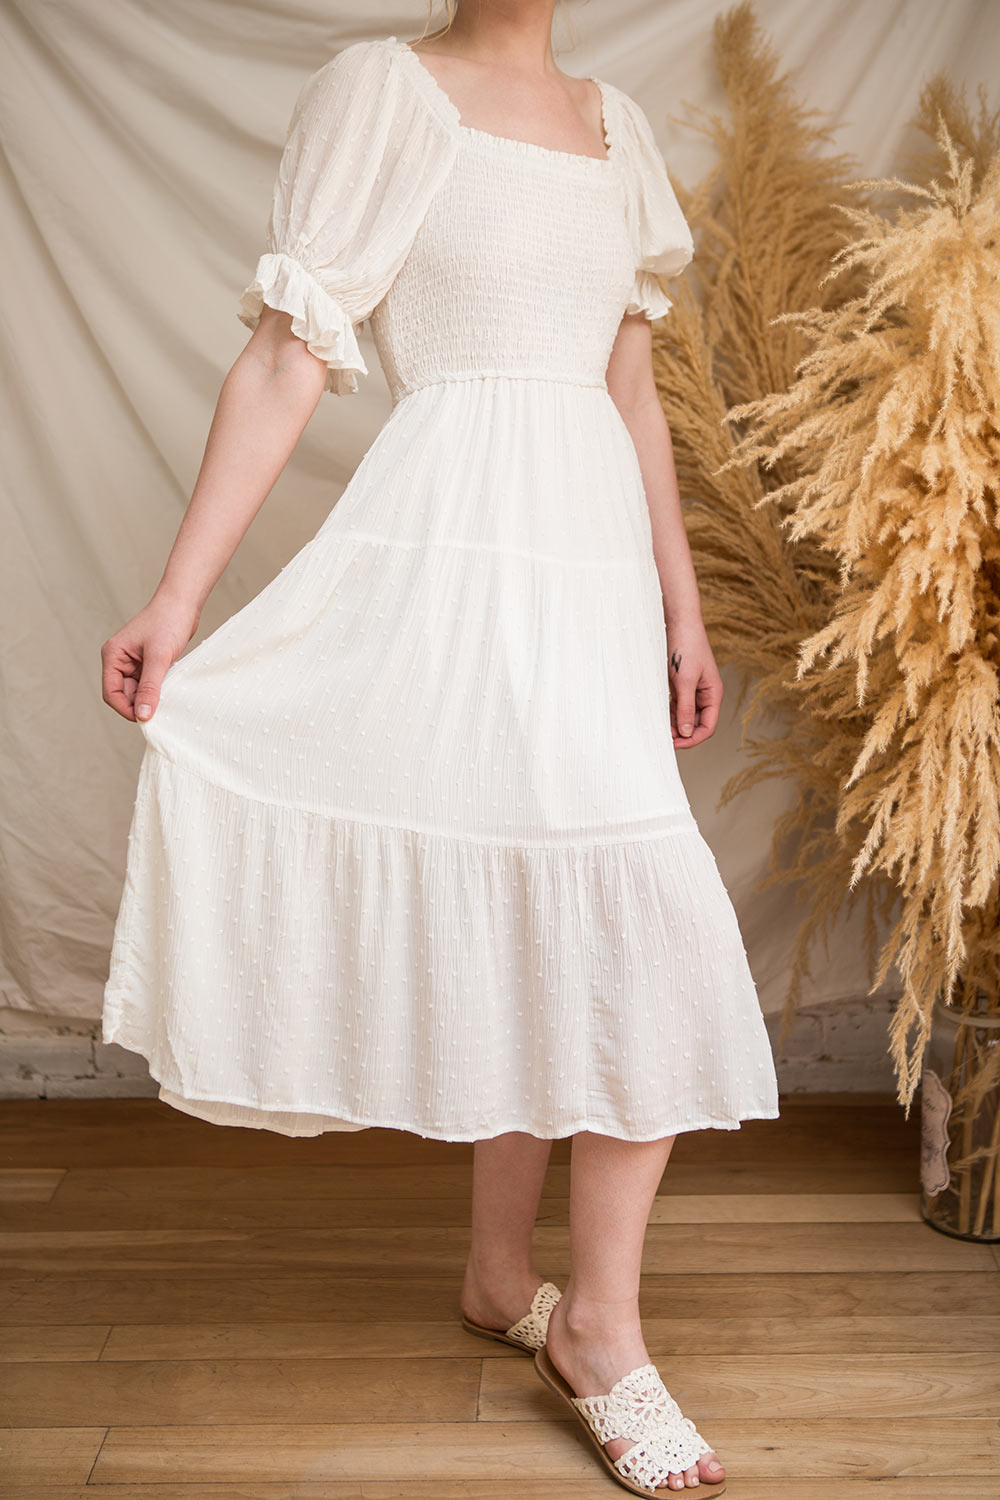 Lorette White Layered Midi Dress w/ Puffy Sleeves | Boutique 1861 on model